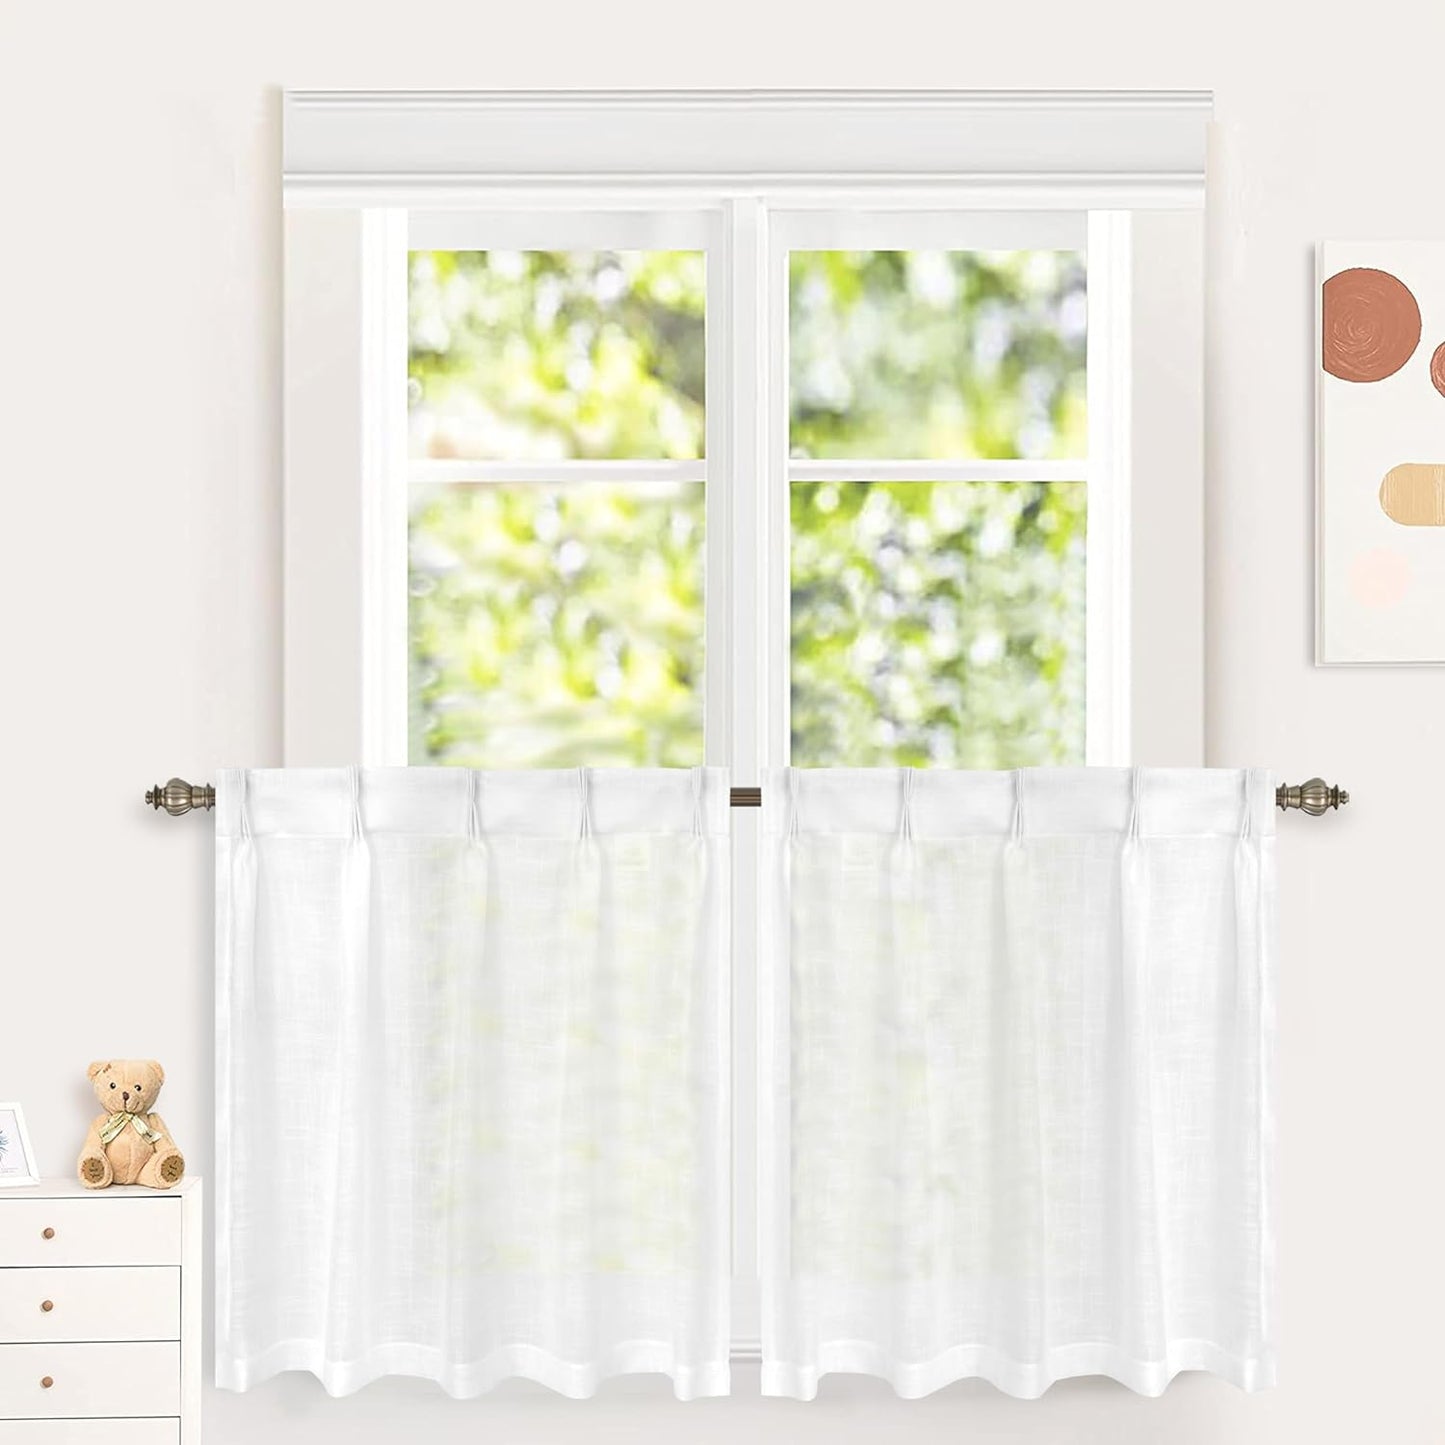 Driftaway Pinch Pleat Kitchen Curtains Linen Textured Short Linen Curtains for Bathroom Laundry Room Cafe Curtains Half Window Curtains 2 Panels Farmhouse Rustic Back Tabs 30 X 36 Inches Ivory Birch  DriftAway Birch White 30"X36" 